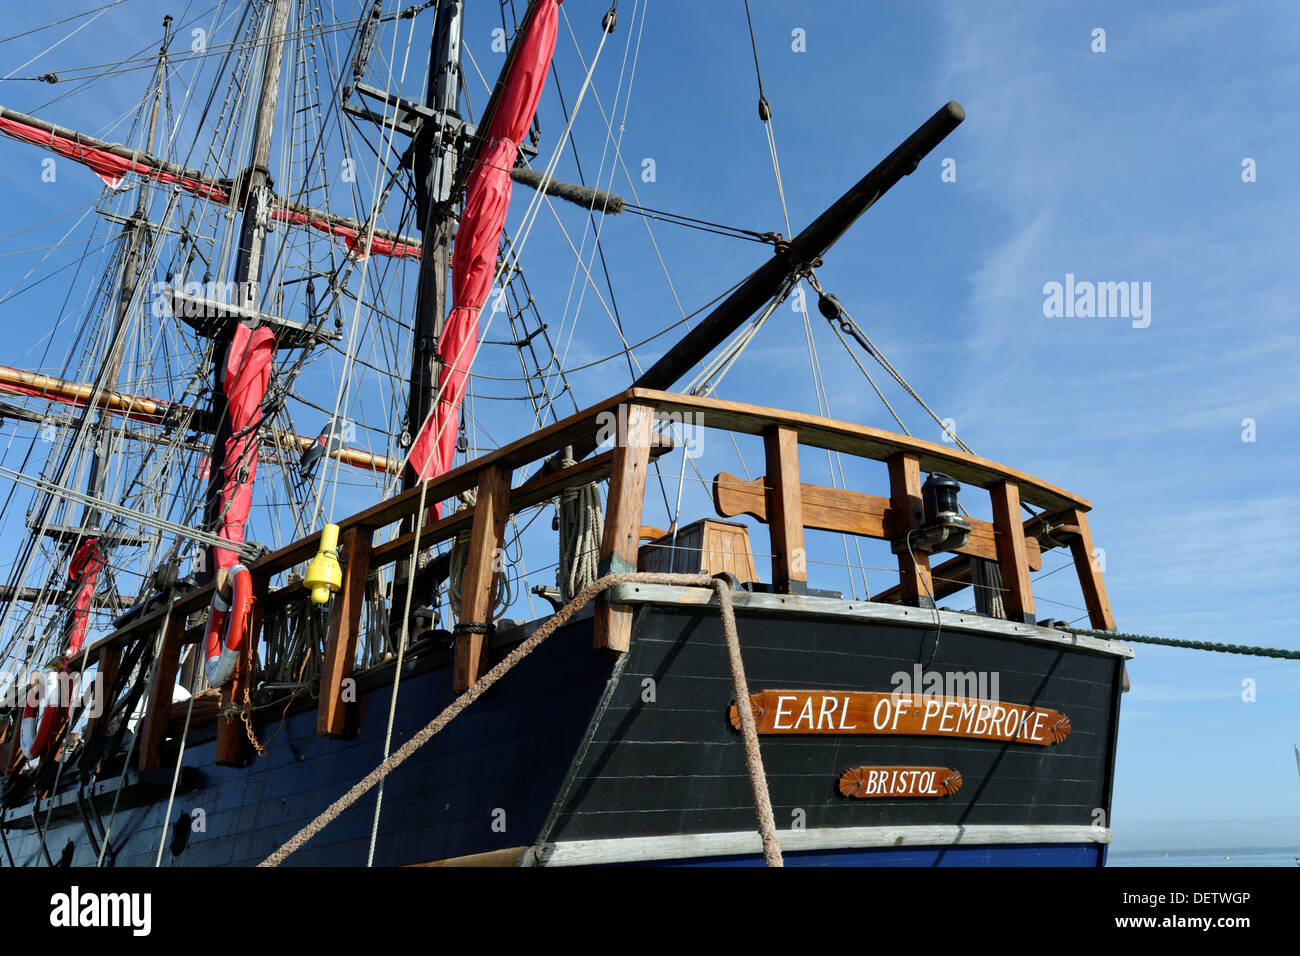 Earle of Pembroke, Tall Ship, Pirate Boat, Cowes, Isle of Wight, England, UK, GB. Stock Photo